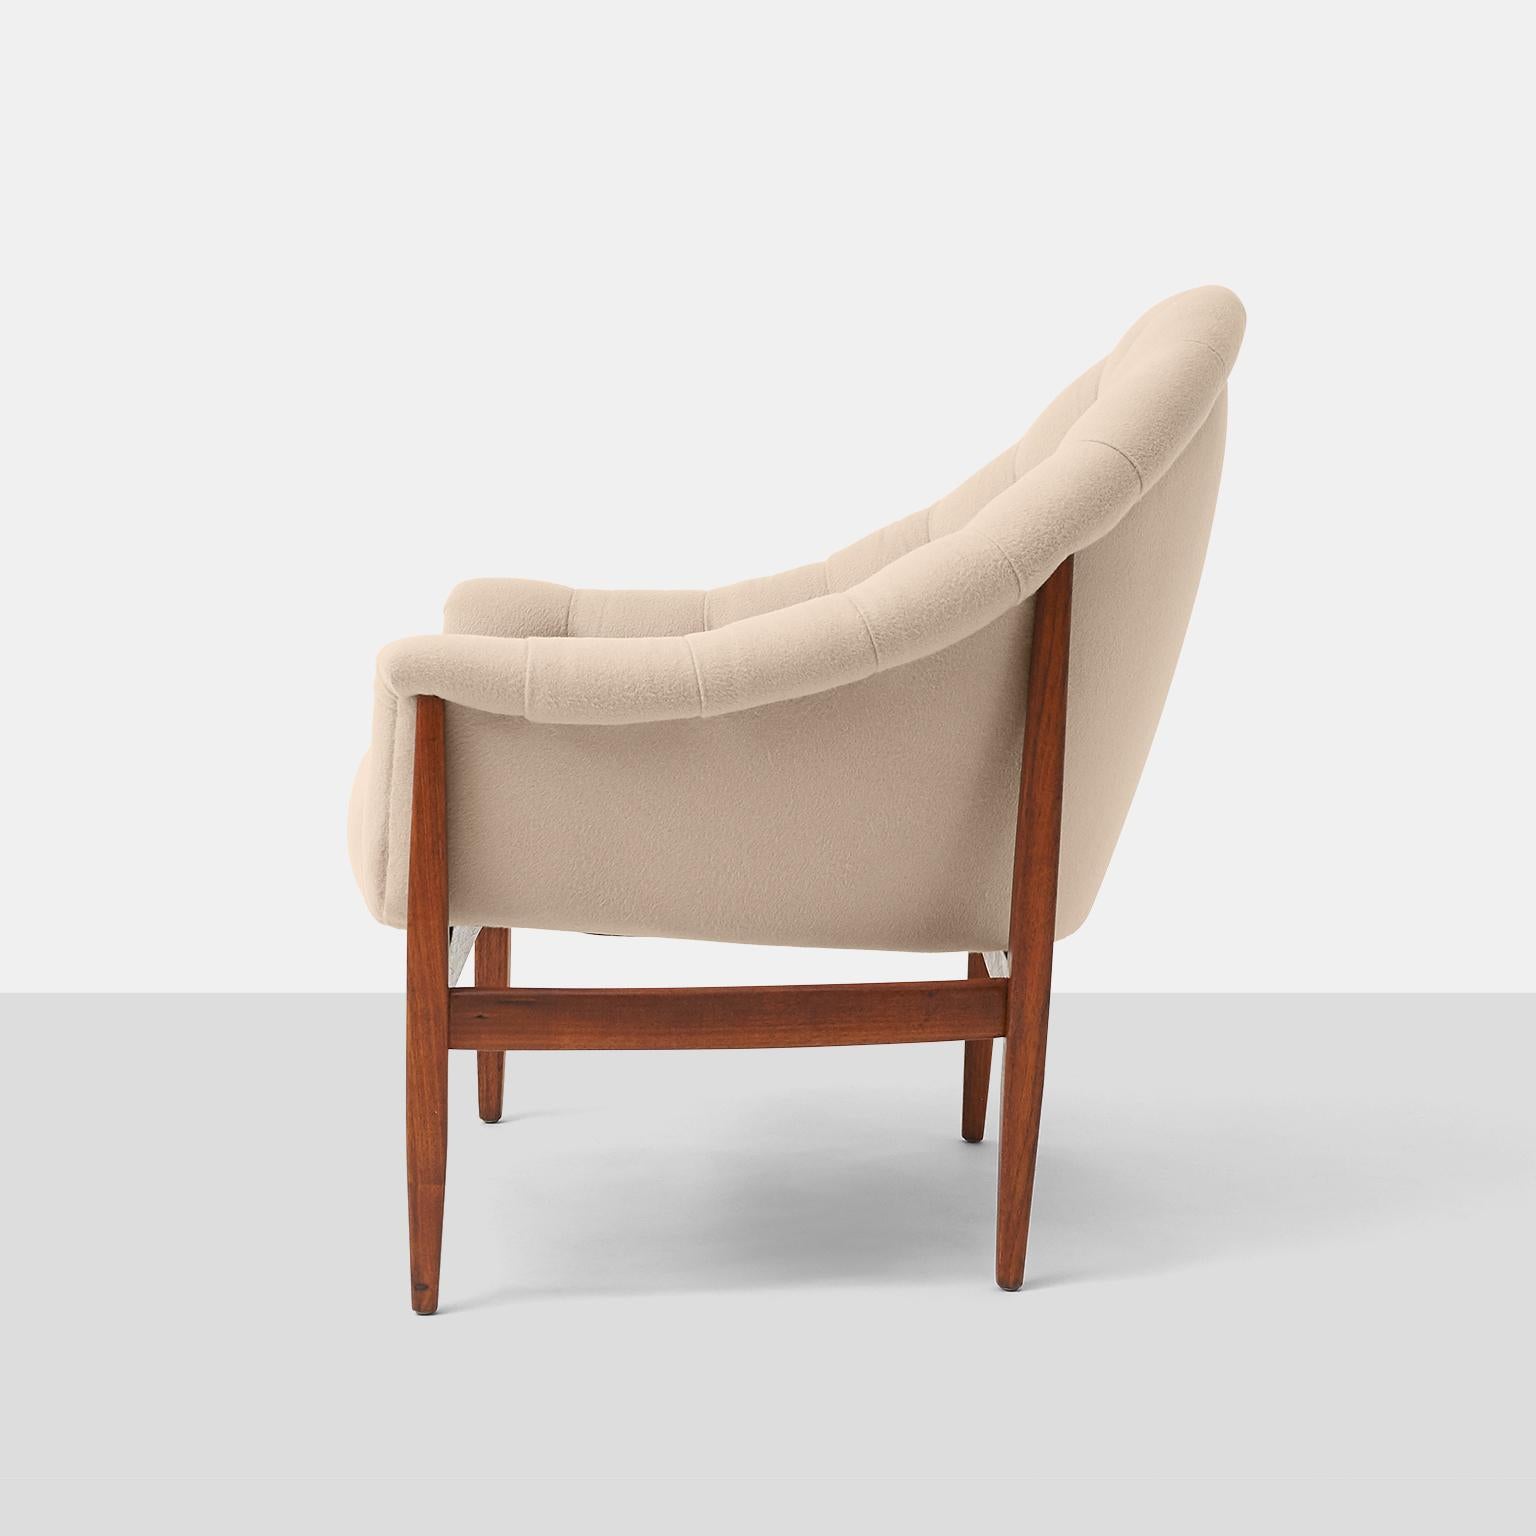 American Tufted Chairs by Milo Baughman